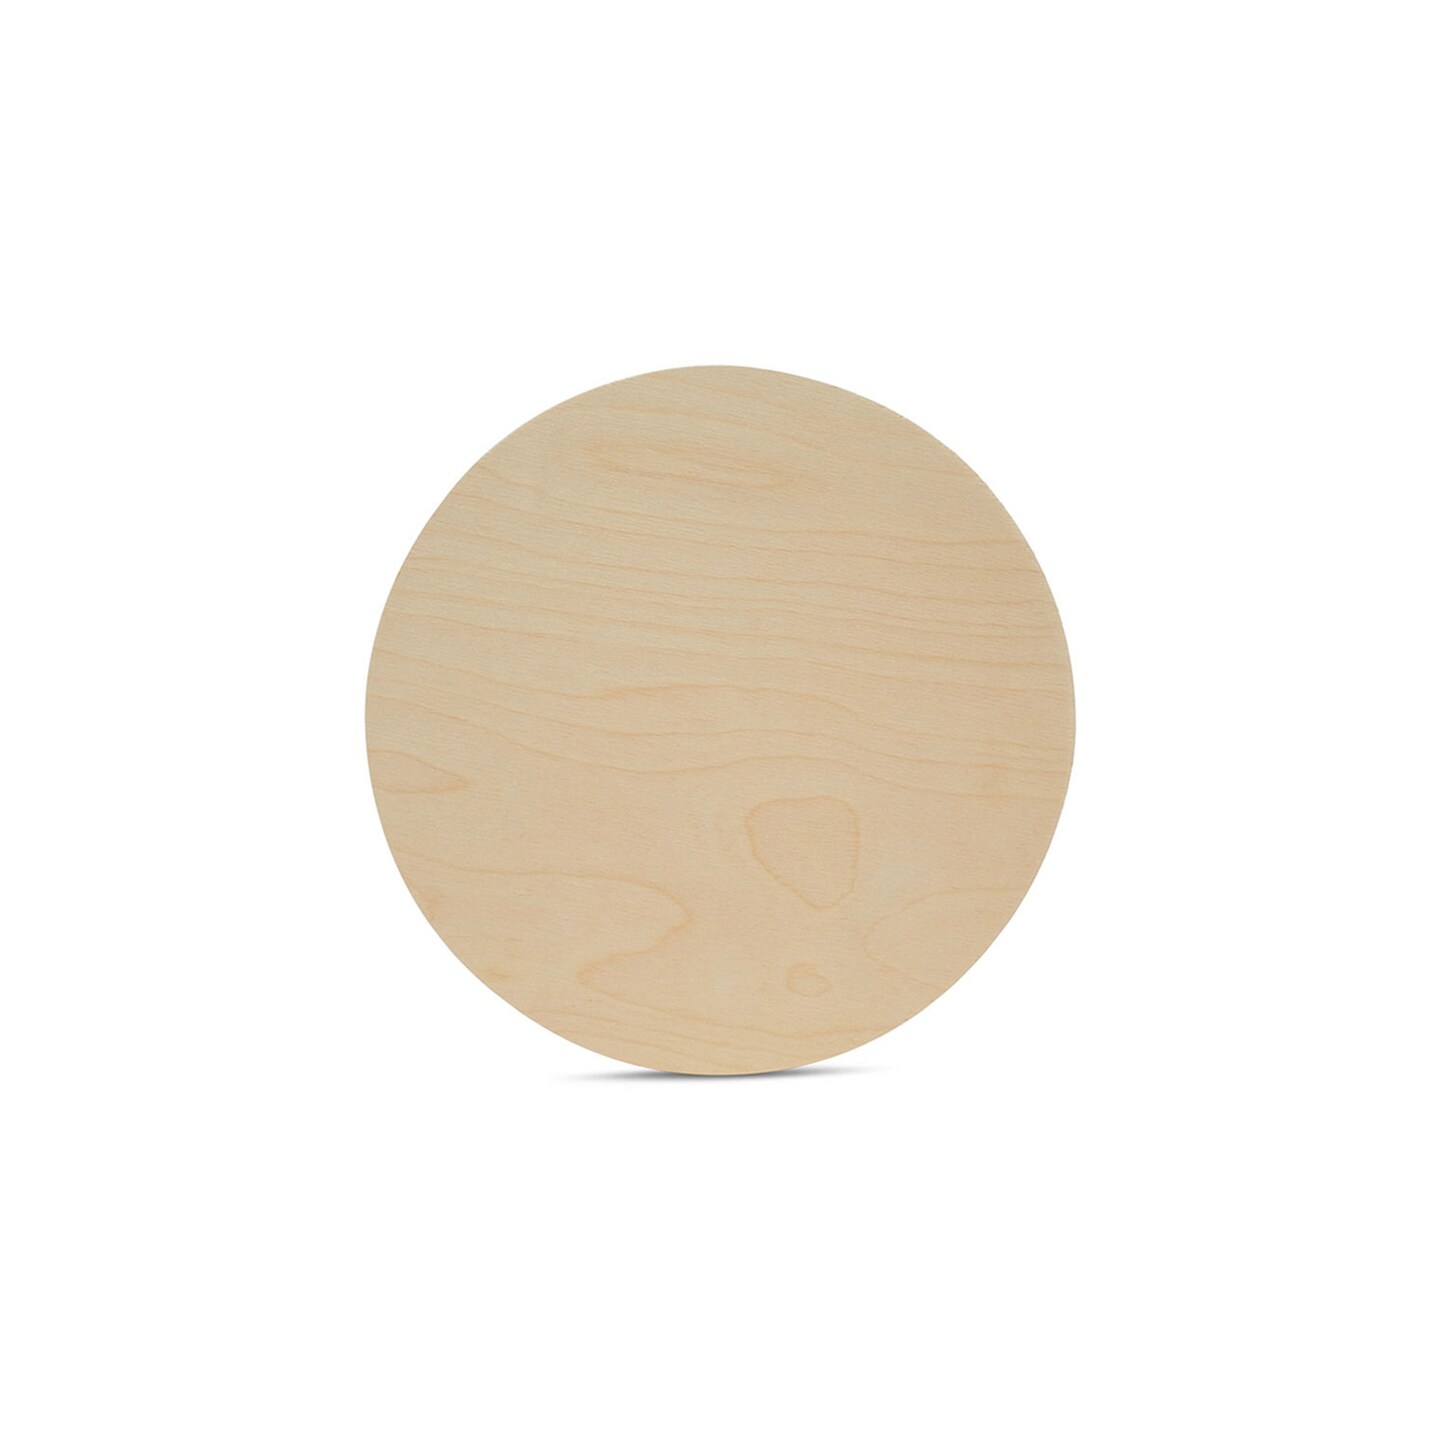 Unfinished Wood Circle - 3 Piece - 12-inch